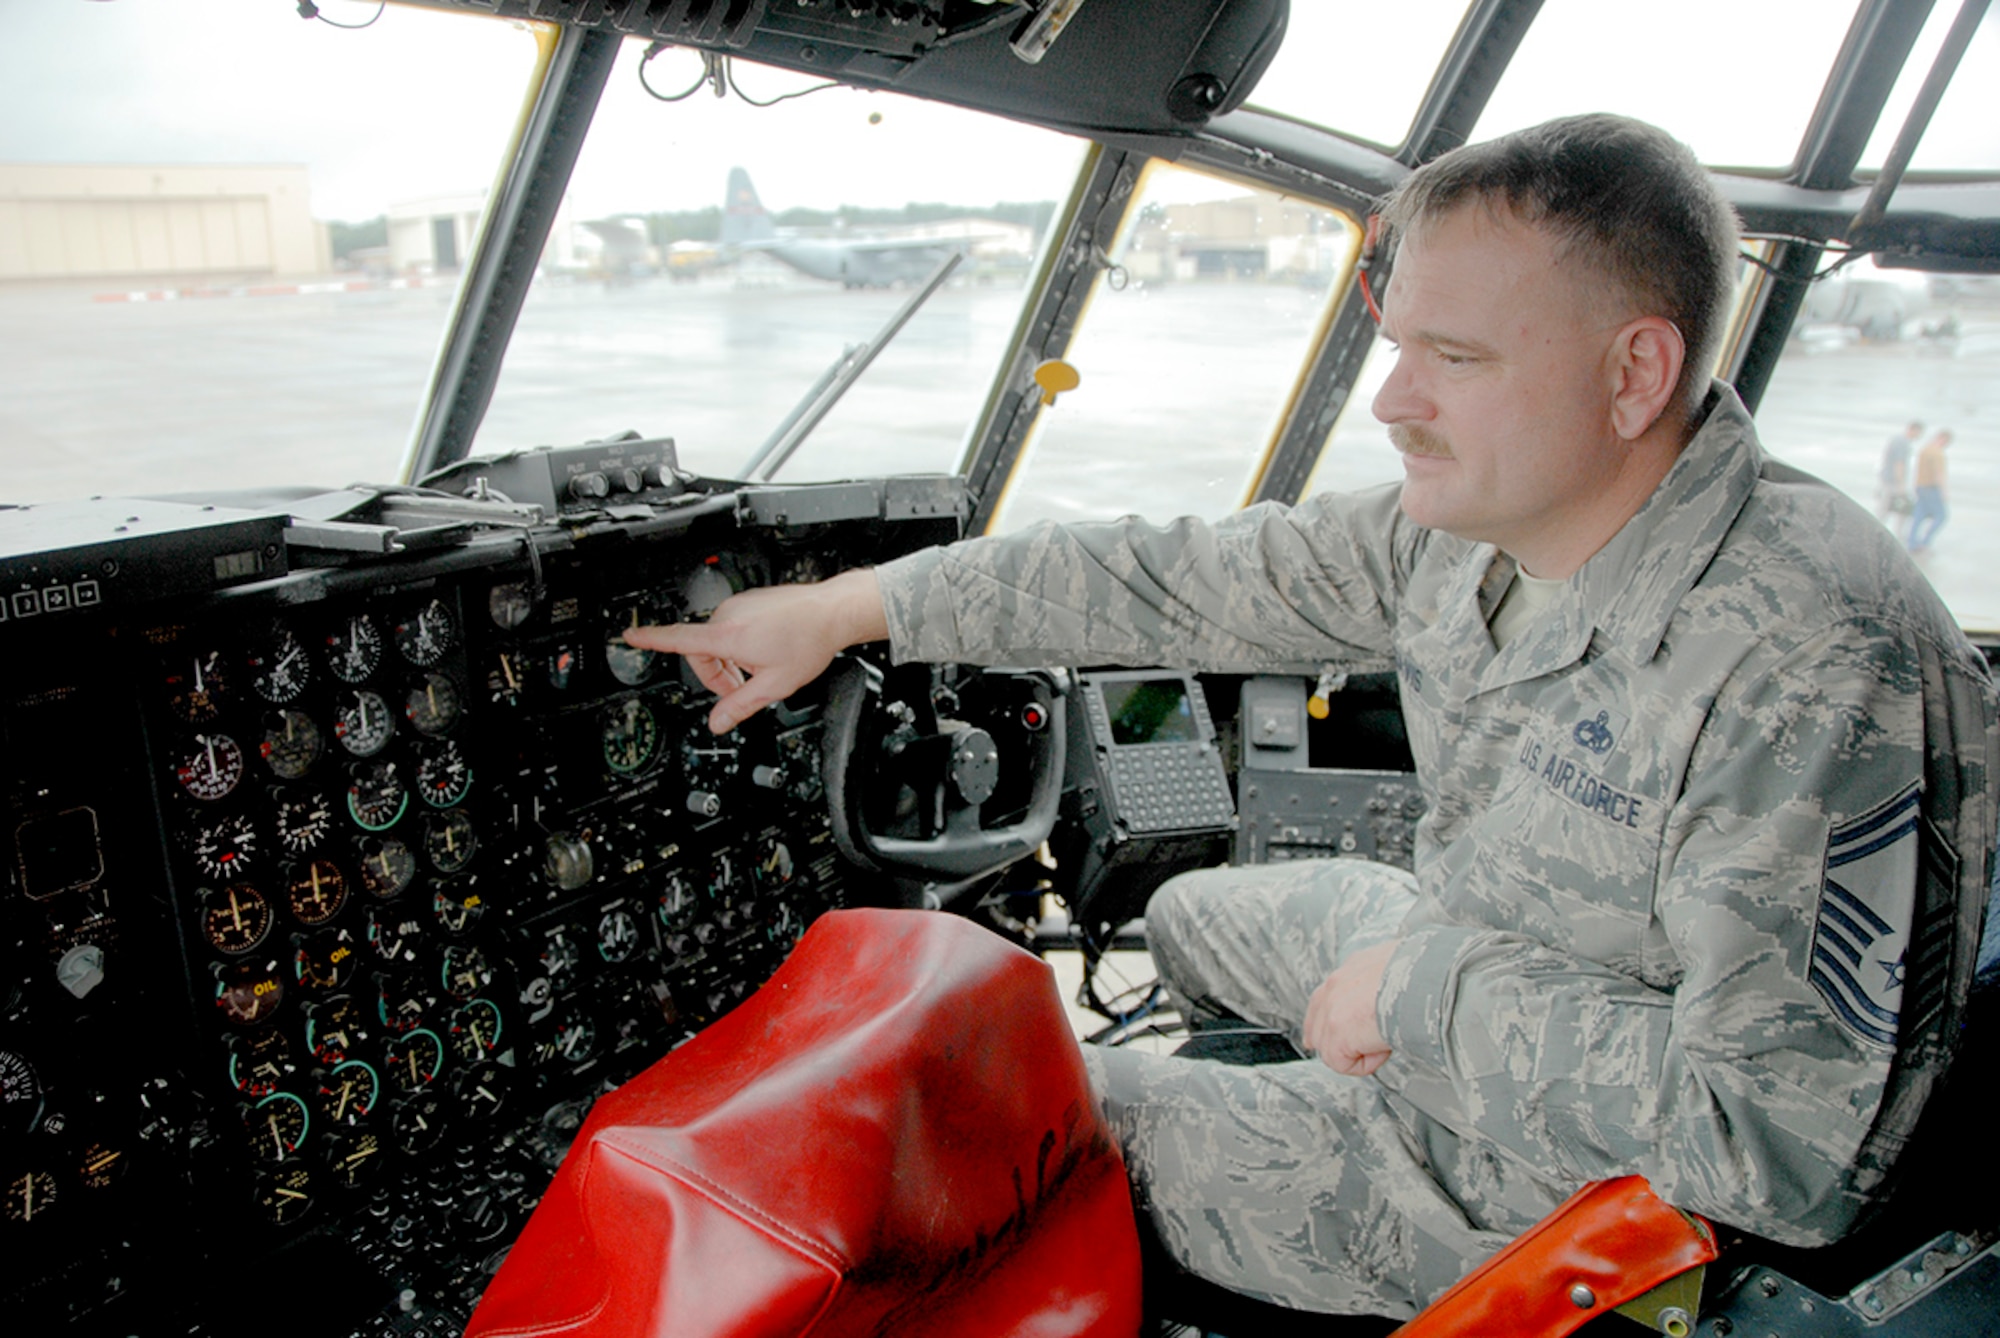 Senior Master Sgt. Shawn Davis, 373rd Training Squadron, Detachment 6 chief, checks out the flight deck of the new C-130H. The aircraft will be permanently moved to a training pad on base. The Sept. 29 arrival of a retired  C-130H will not only enable maintenance professionals across Robins to have a dedicated aircraft for training purposes, but it will be a welcome addition to the two F-15s that no longer have to sit by themselves in the 402nd Aircraft Maintenance Group’s aircraft training pad. The 373rd is one of many Air Education and Training Command field training detachments assigned to the 982nd Training Group at Sheppard Air Force Base, Texas. (U.S. Air Force photo by Misuzu Allen)

